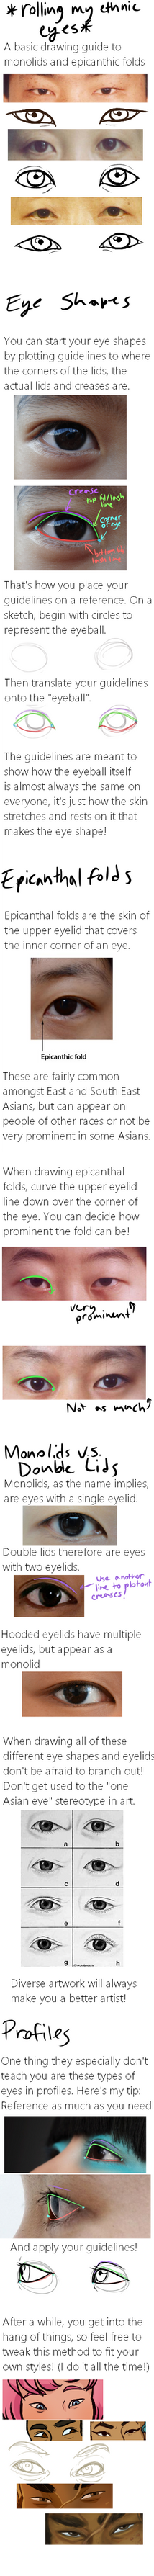 the all expansive 'asian' eye drawing guidei